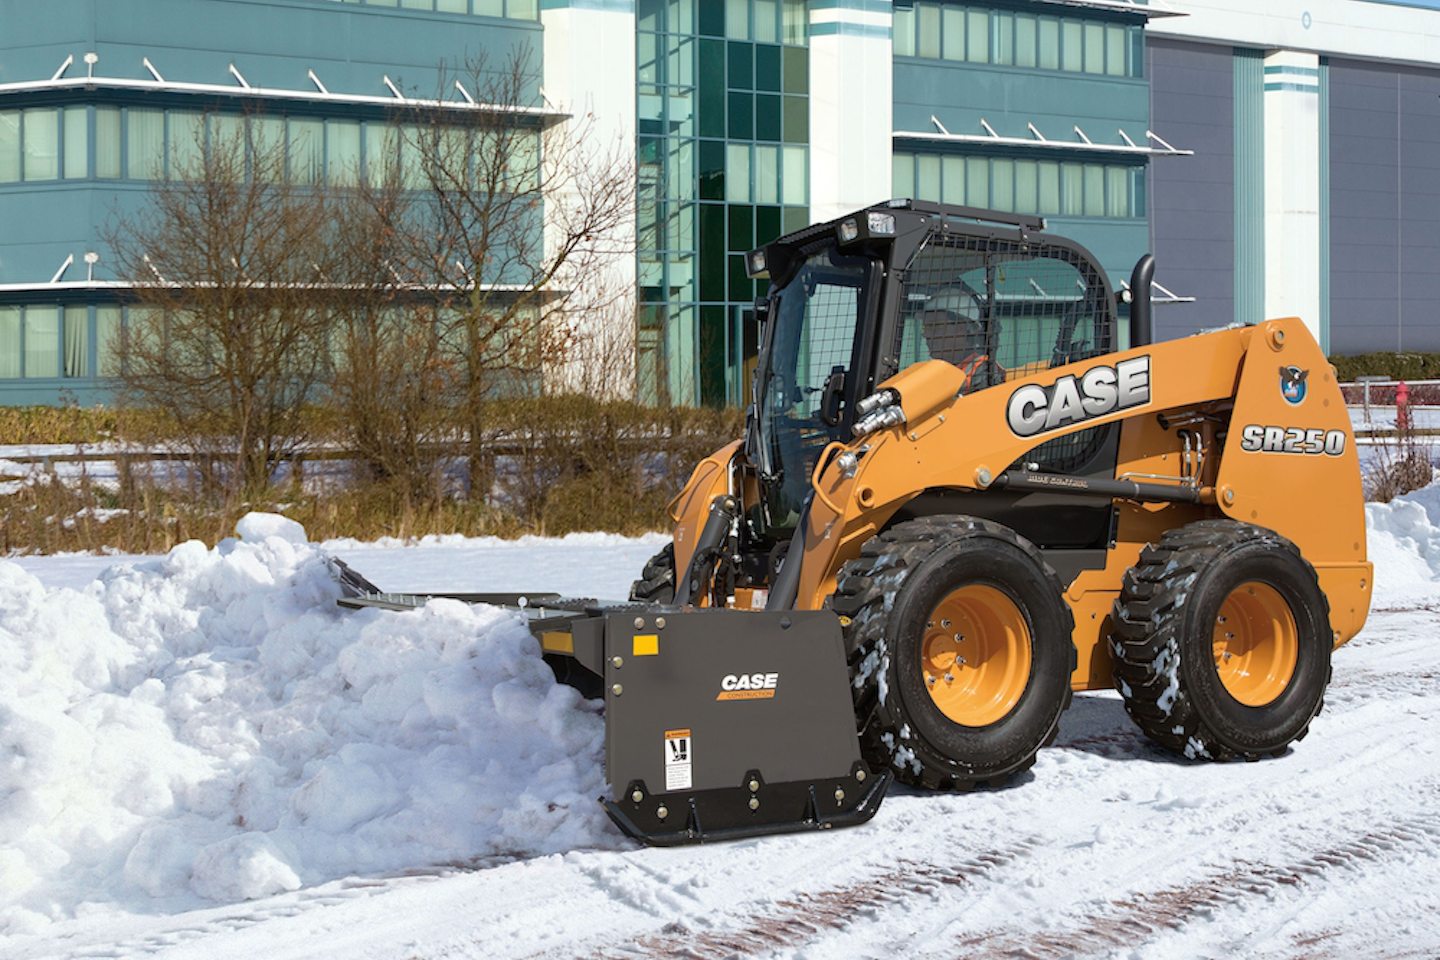 Case debuts new snow removal package for SR250, SV300 skid steers